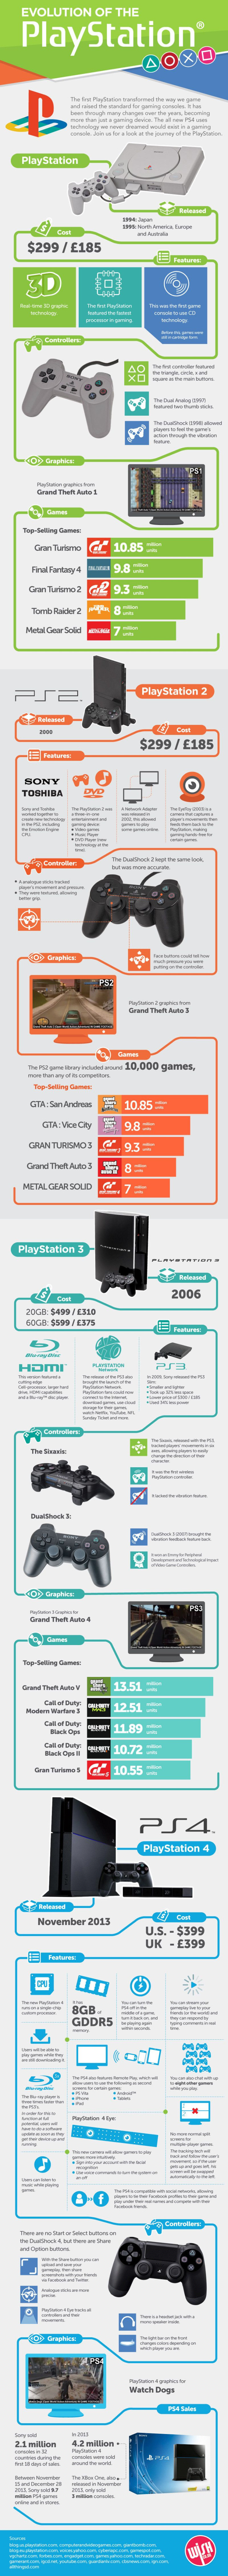 evolution-of-the-playstation_52f08c4585f63